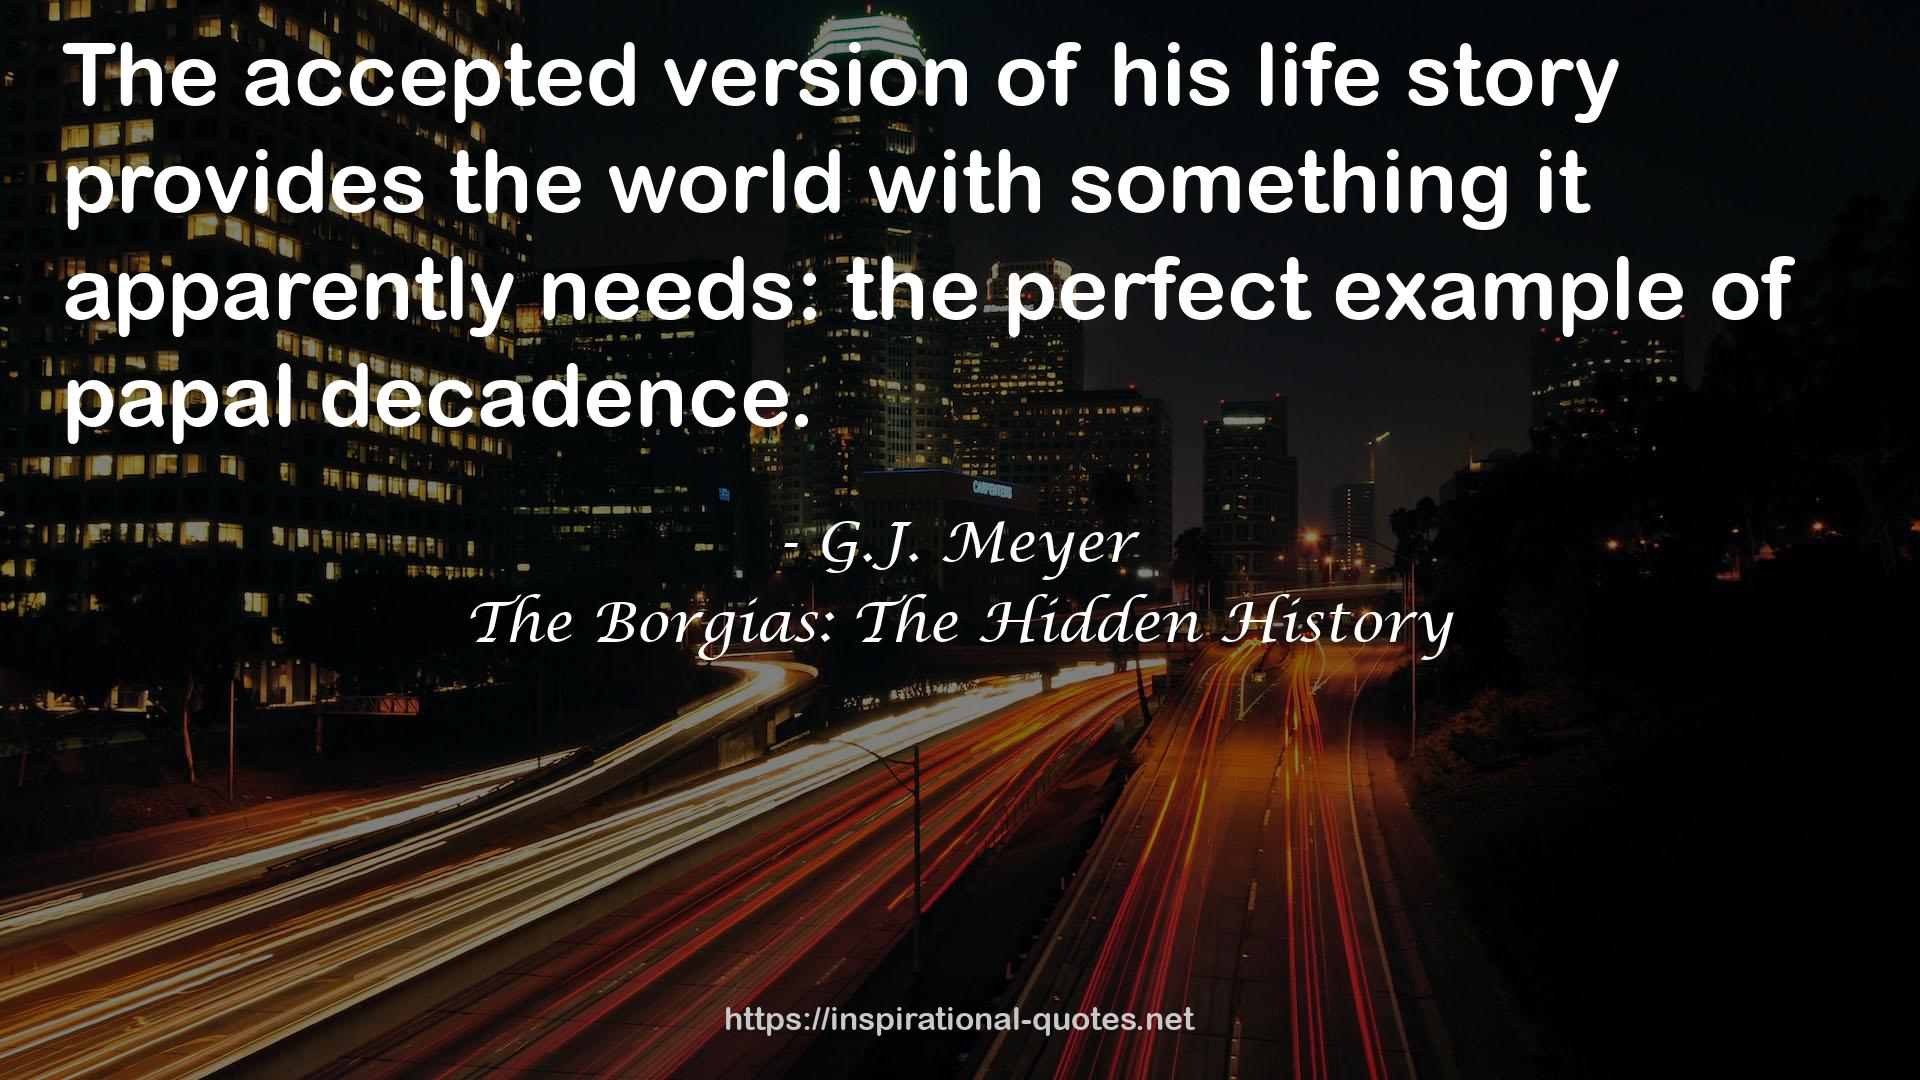 G.J. Meyer QUOTES